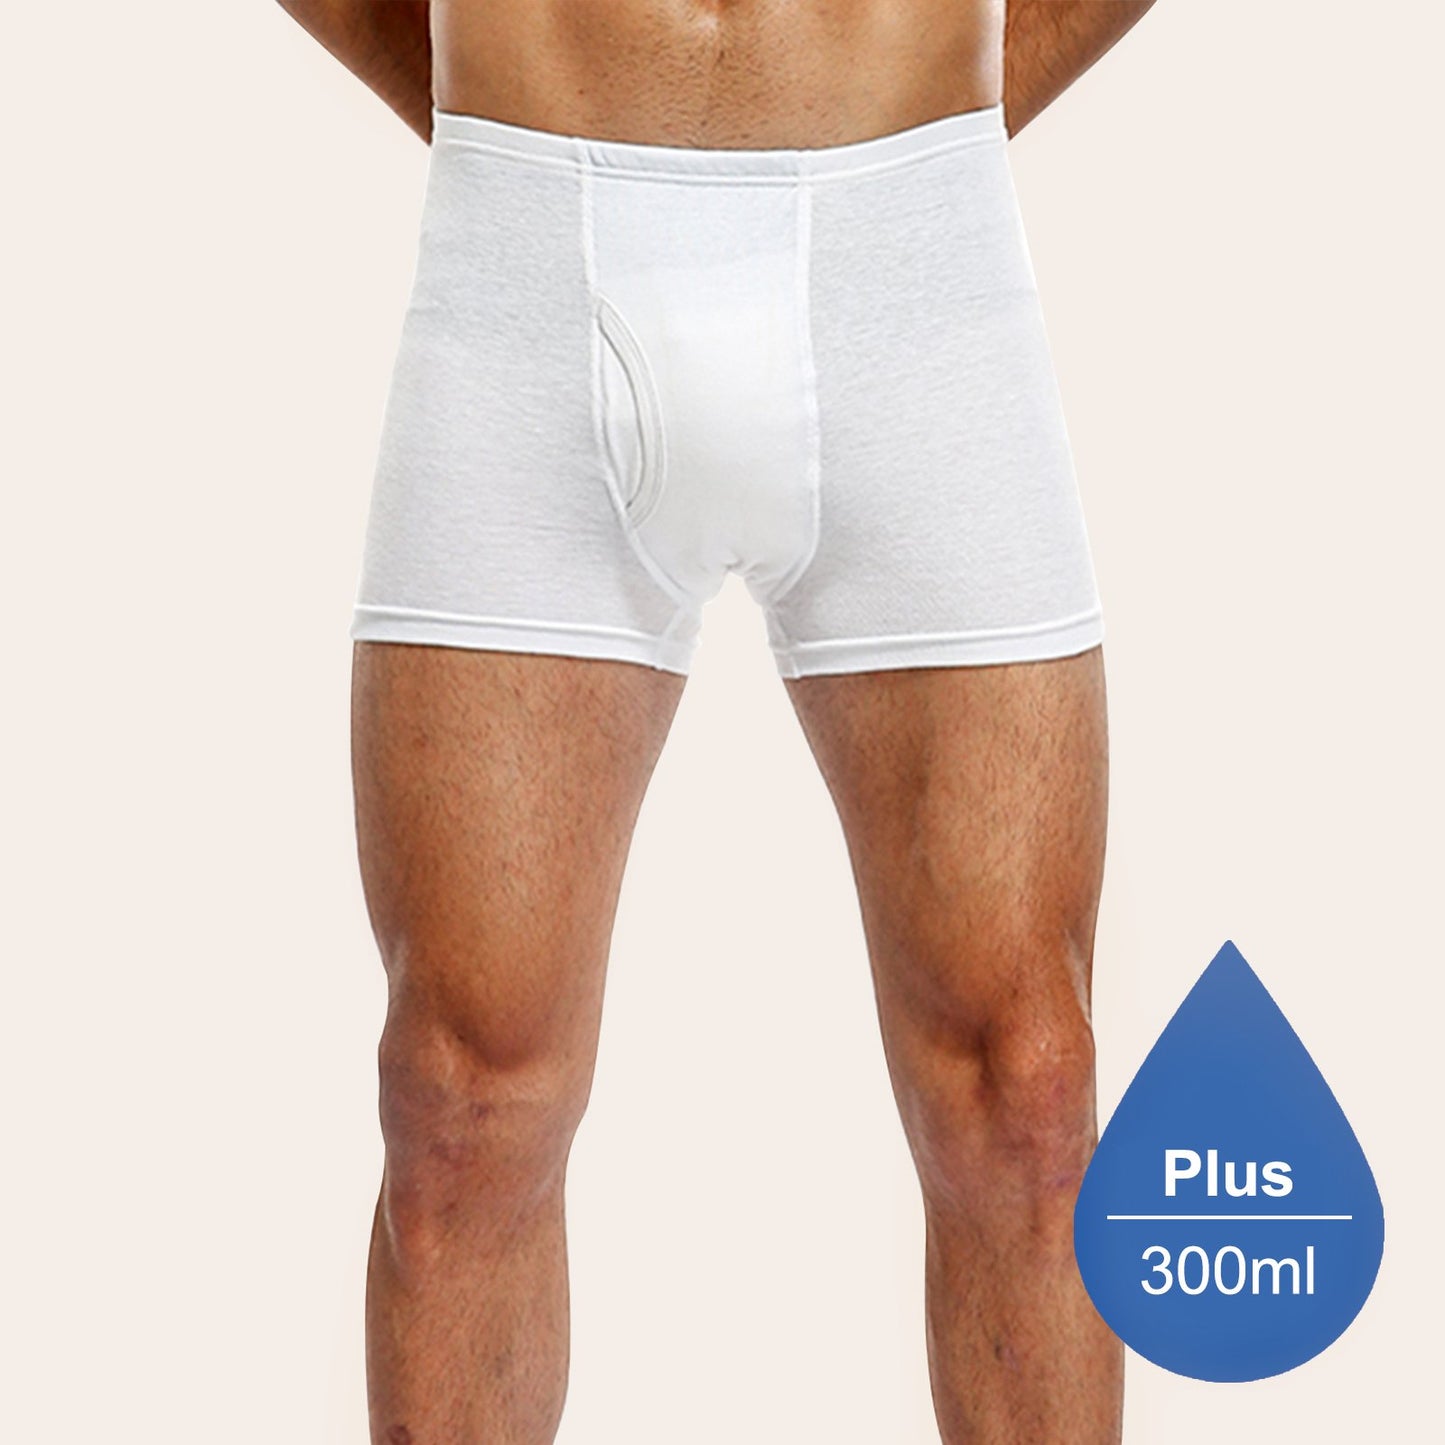 Mens Incontinence Underwear Leakproof Reusable Heavy Absorbency Overnight -M67